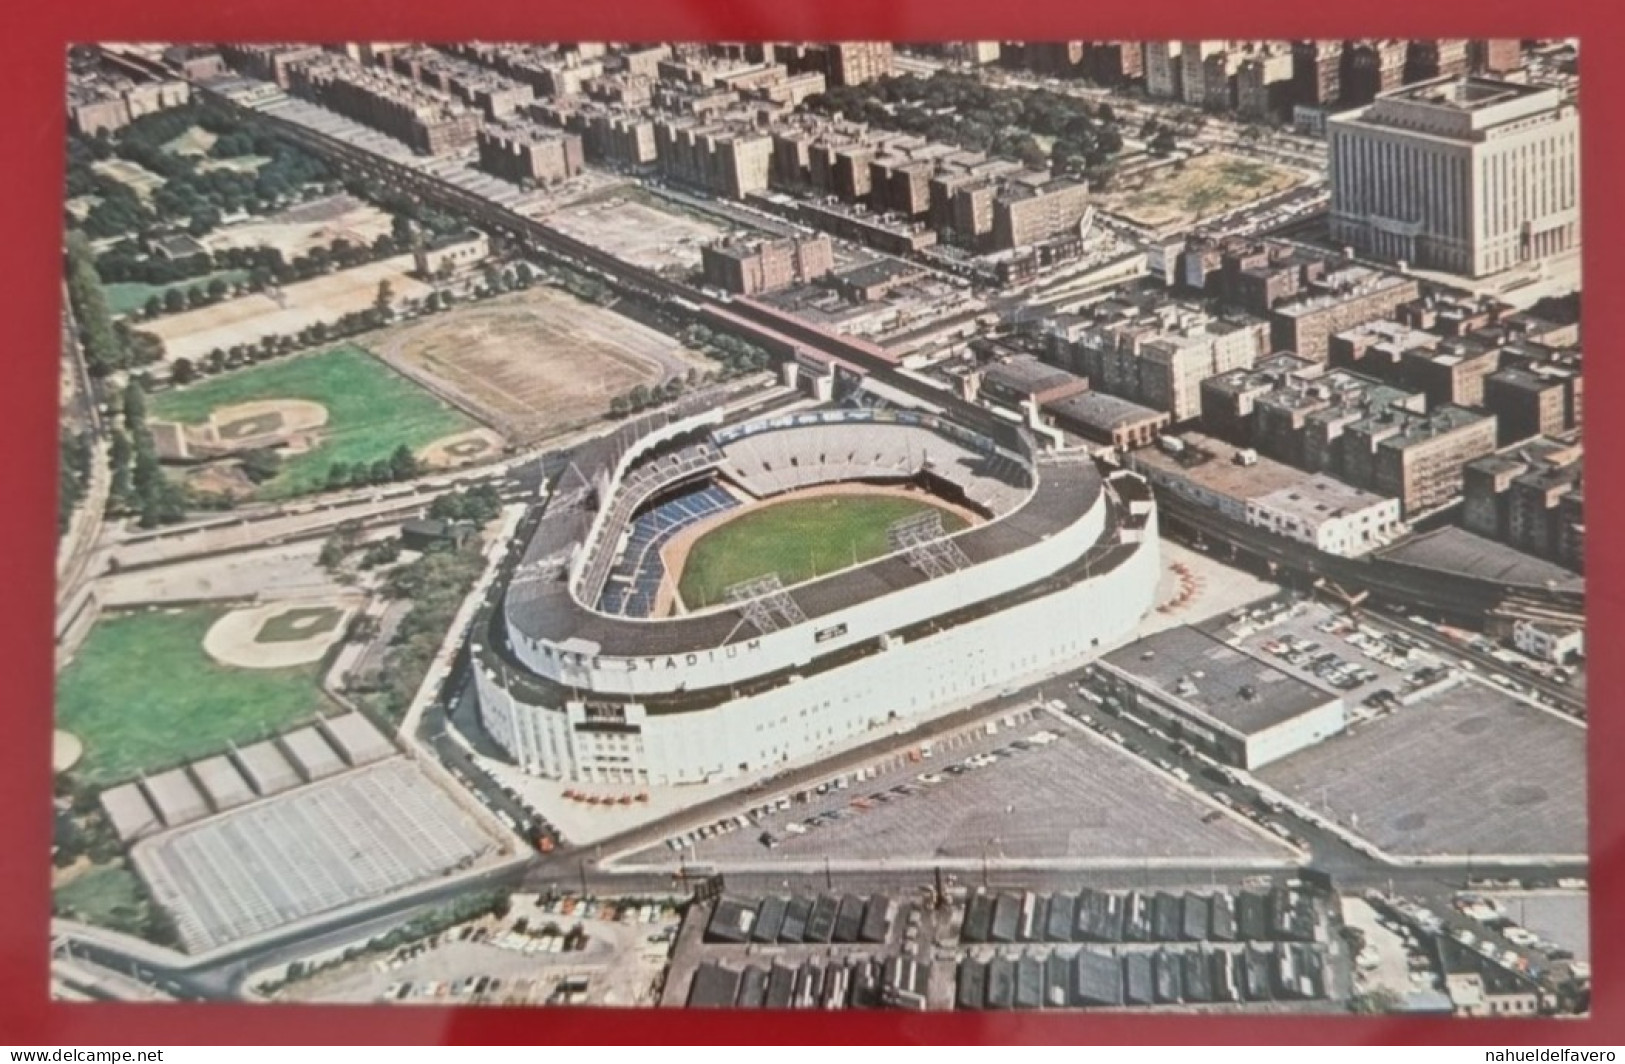 Uncirculated Postcard - USA - NY, NEW YORK CITY - AIR VIEW OF YANKEE STADIUM - Stades & Structures Sportives